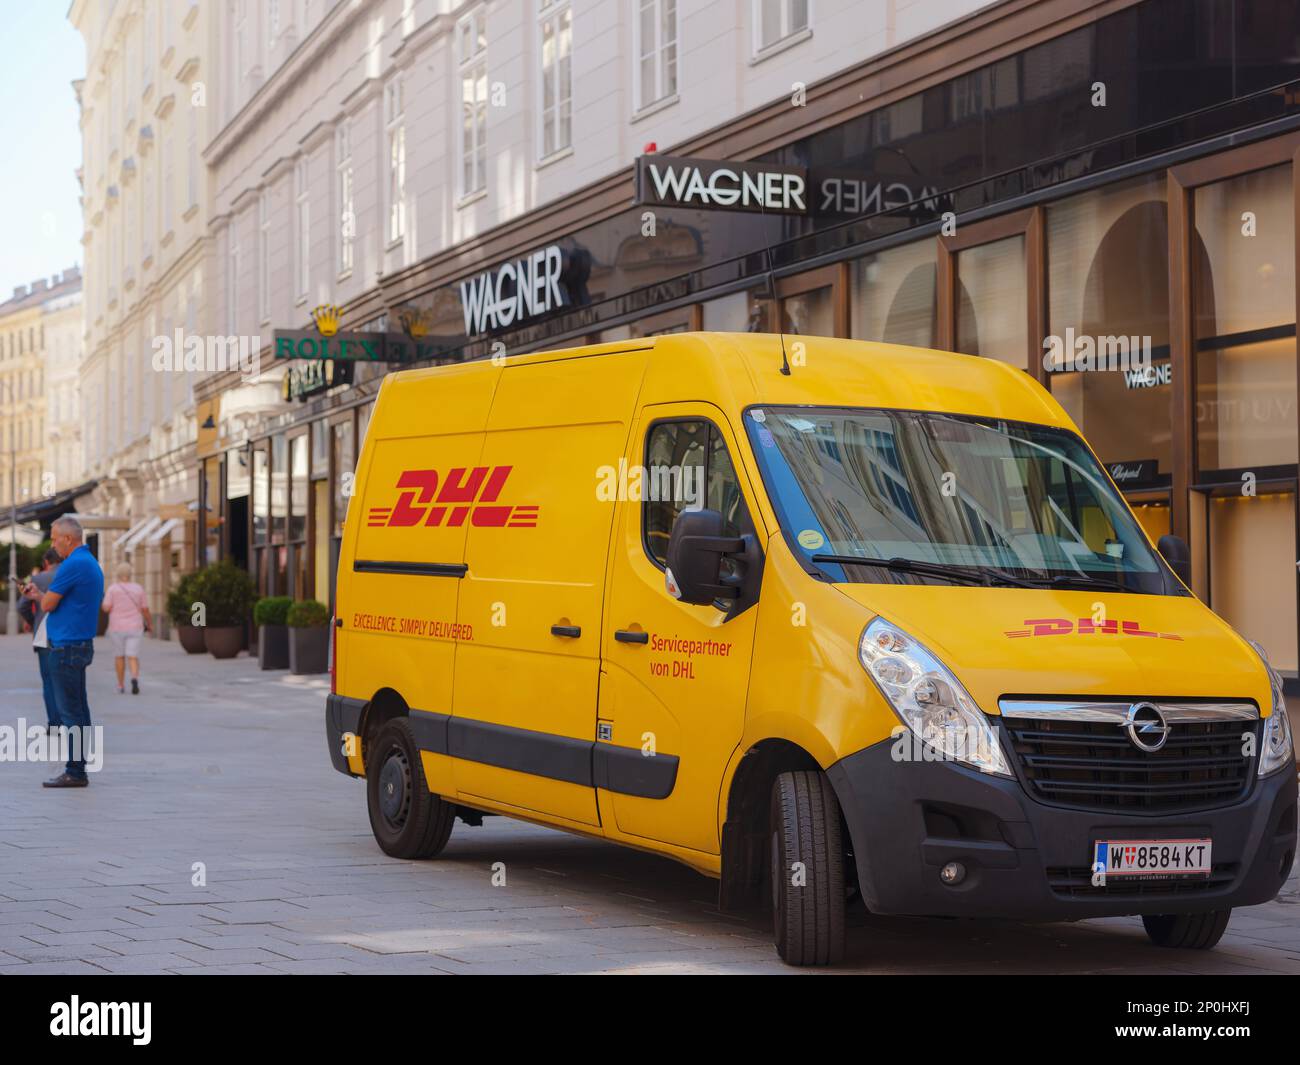 Vienna, Austria - August 11, 2022: yellow DHL courier service delivery van on the street in Munich. DHL is owned by the German postal service Deutsche Post. Stock Photo